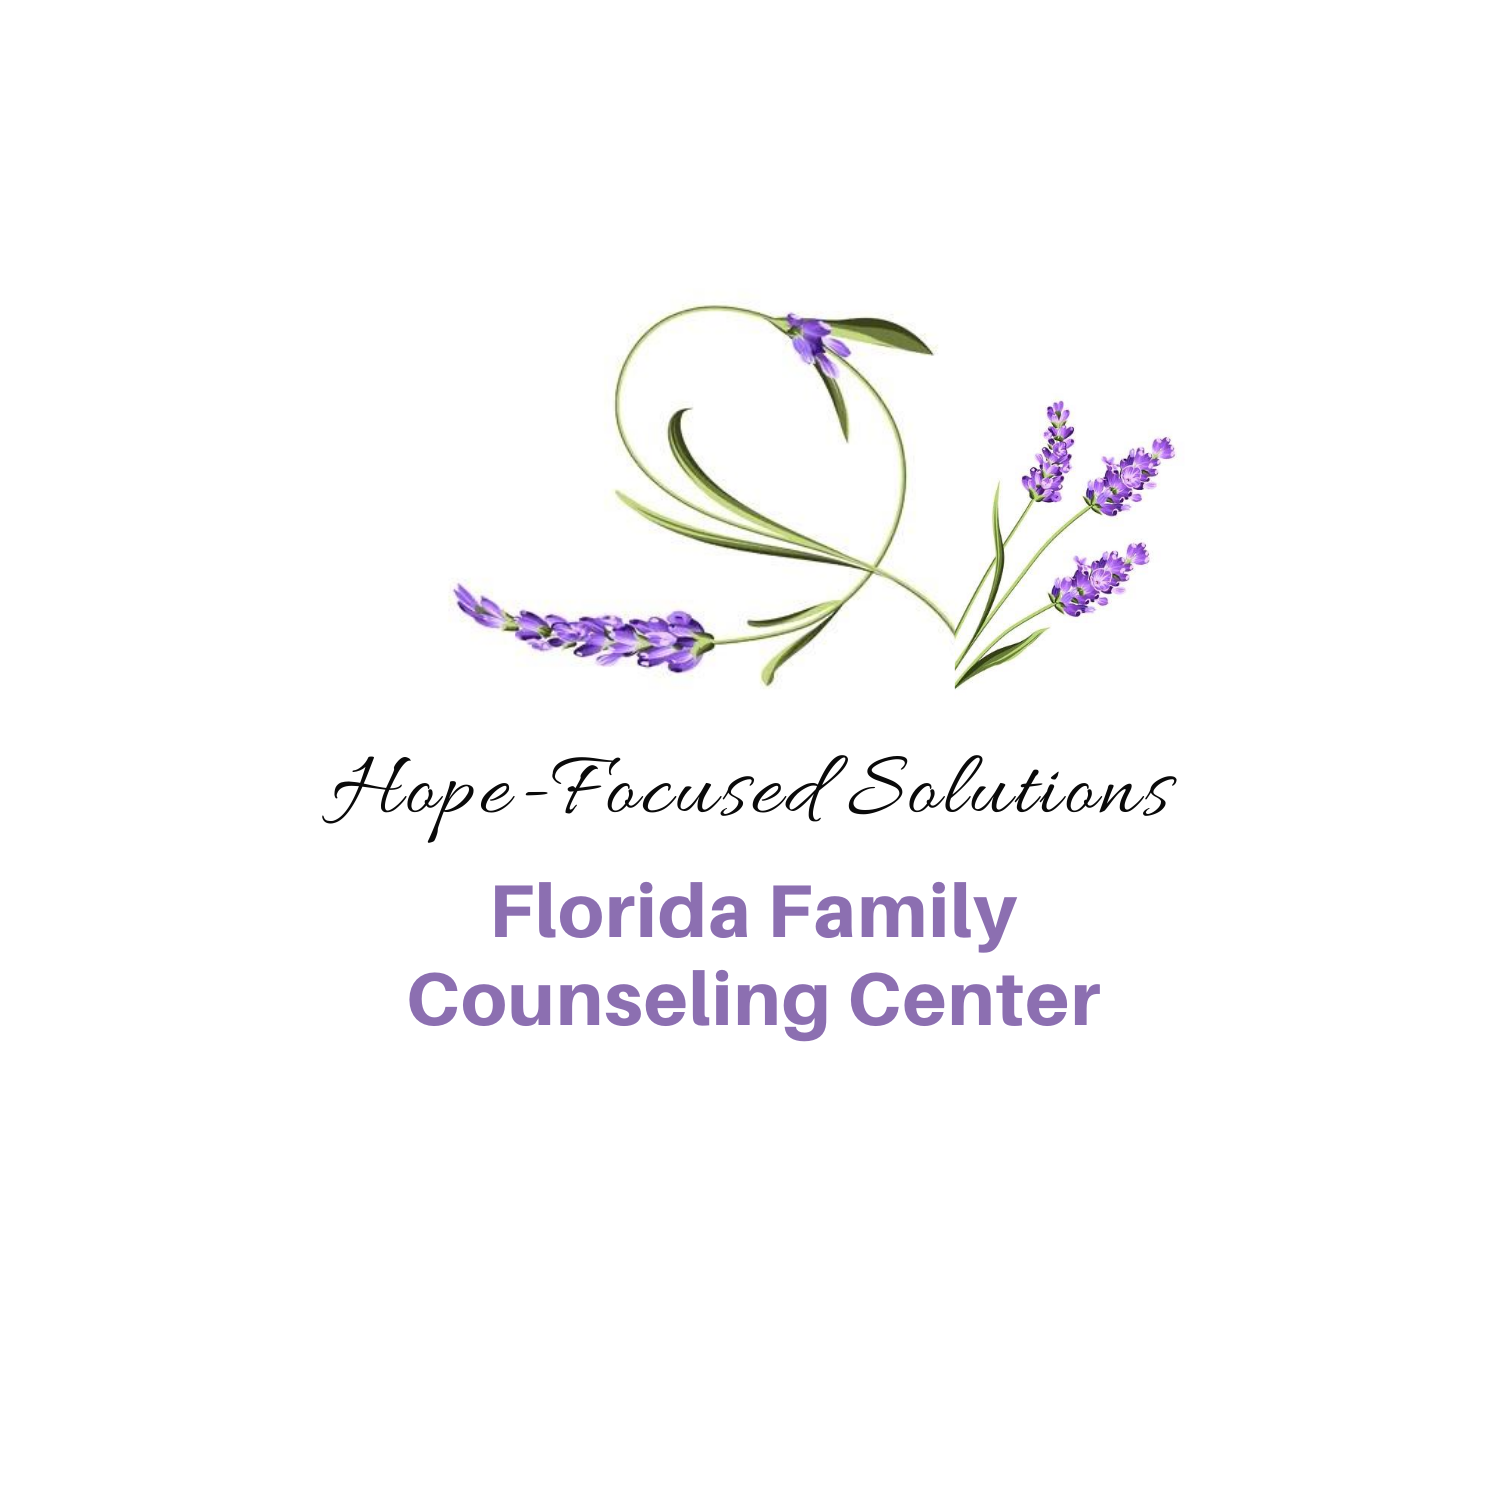 Florida Marriage and Family Counselor | Therapy in Fort Lauderdale, Florida